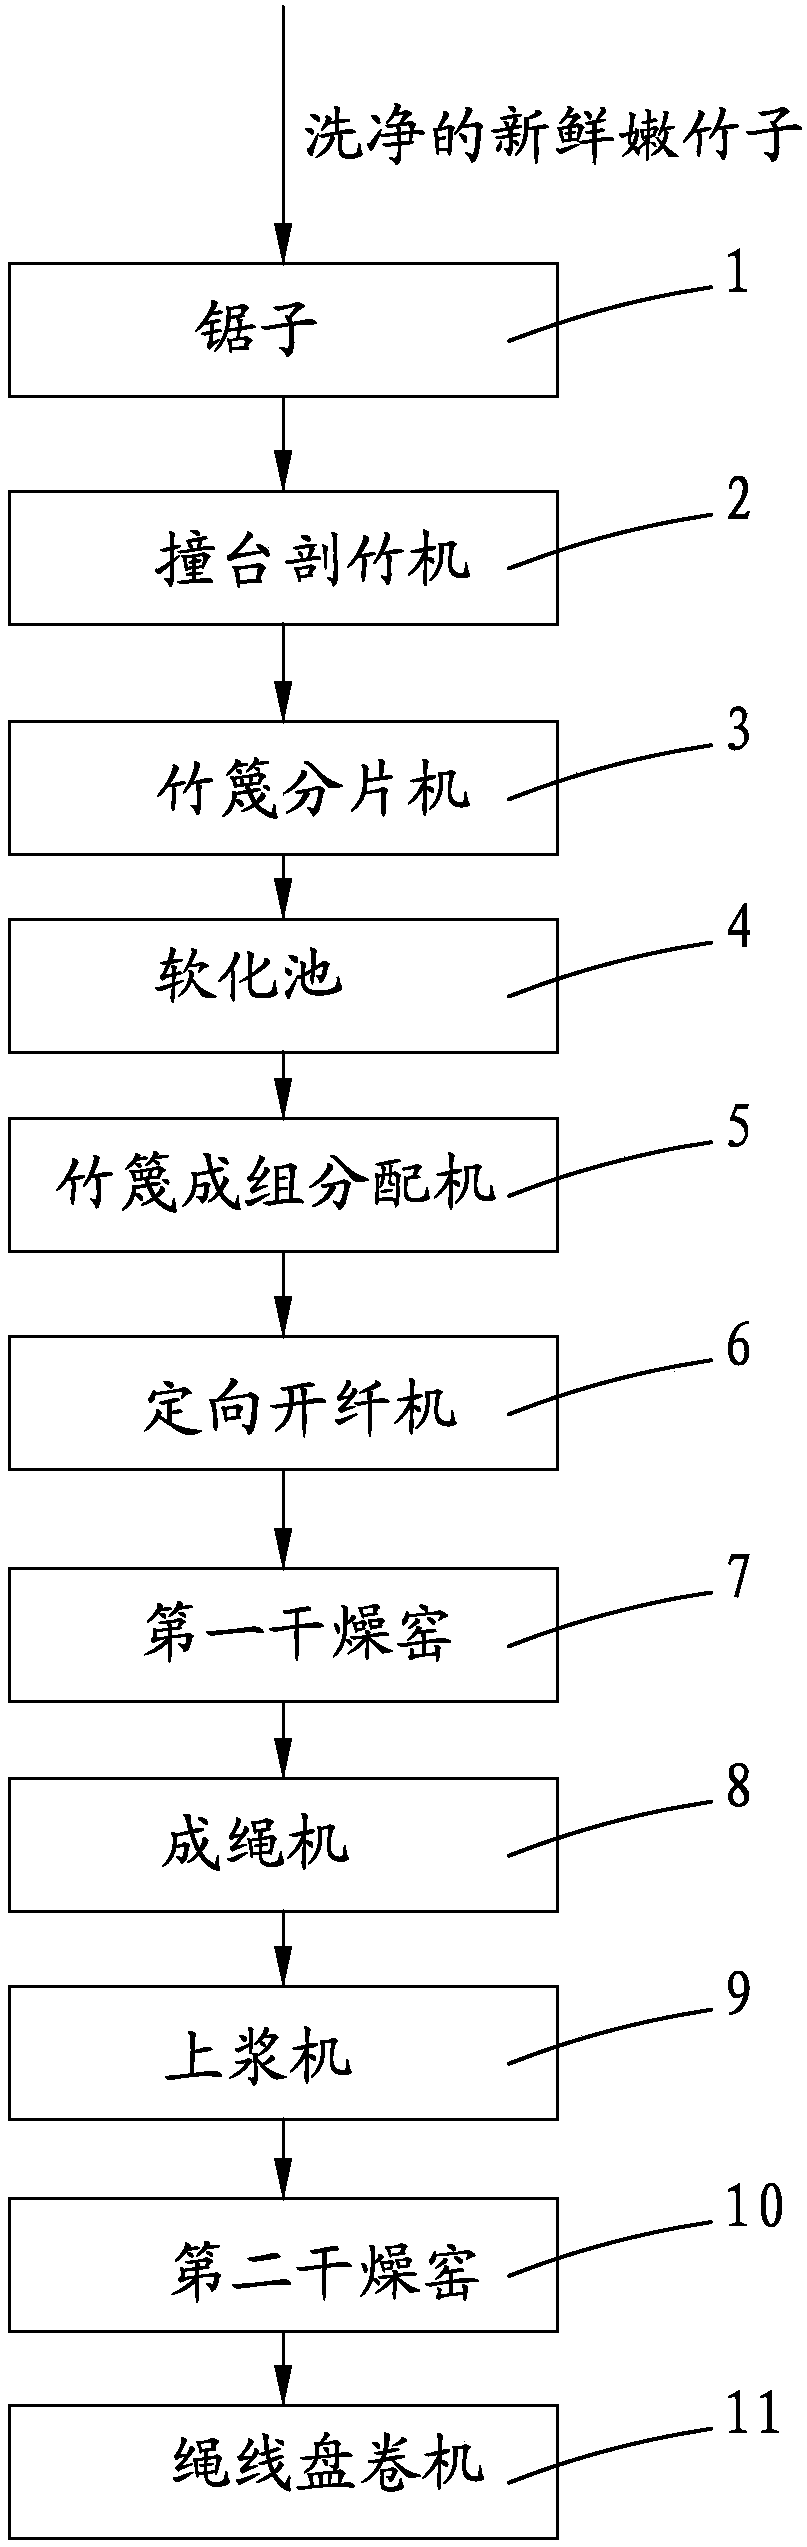 Preparation method and system for bamboo fiber rope